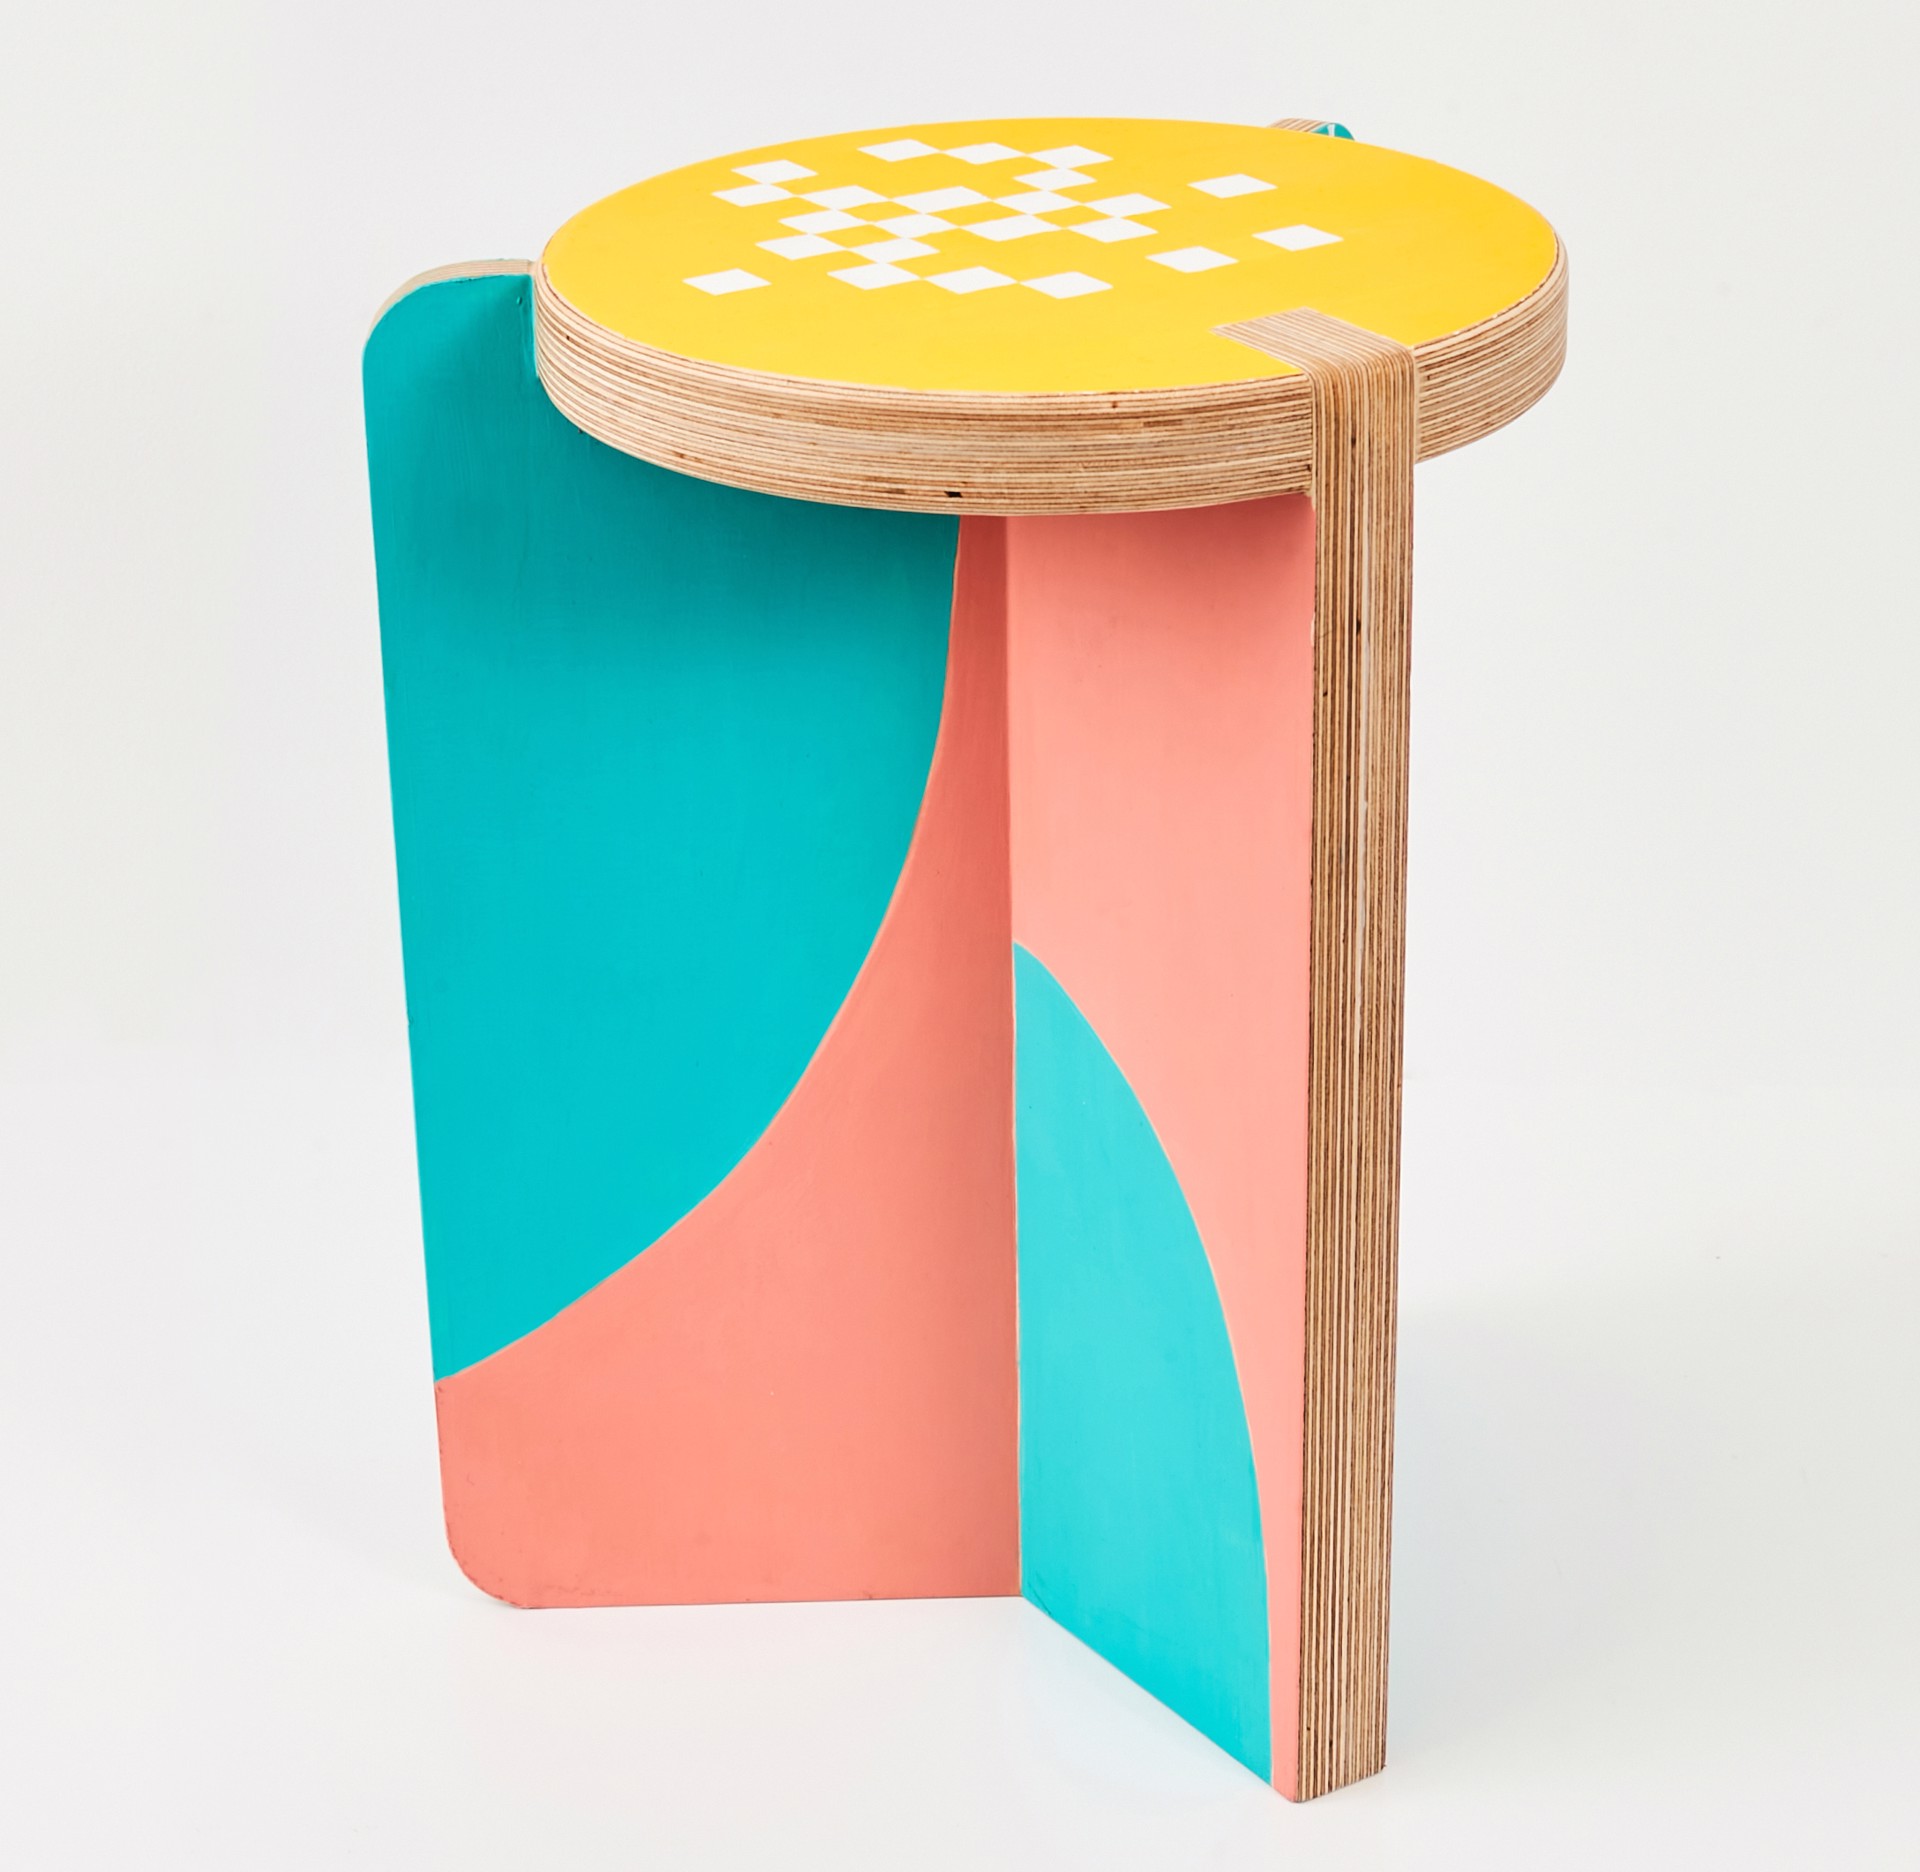 Le Stool by Suzanne Chin